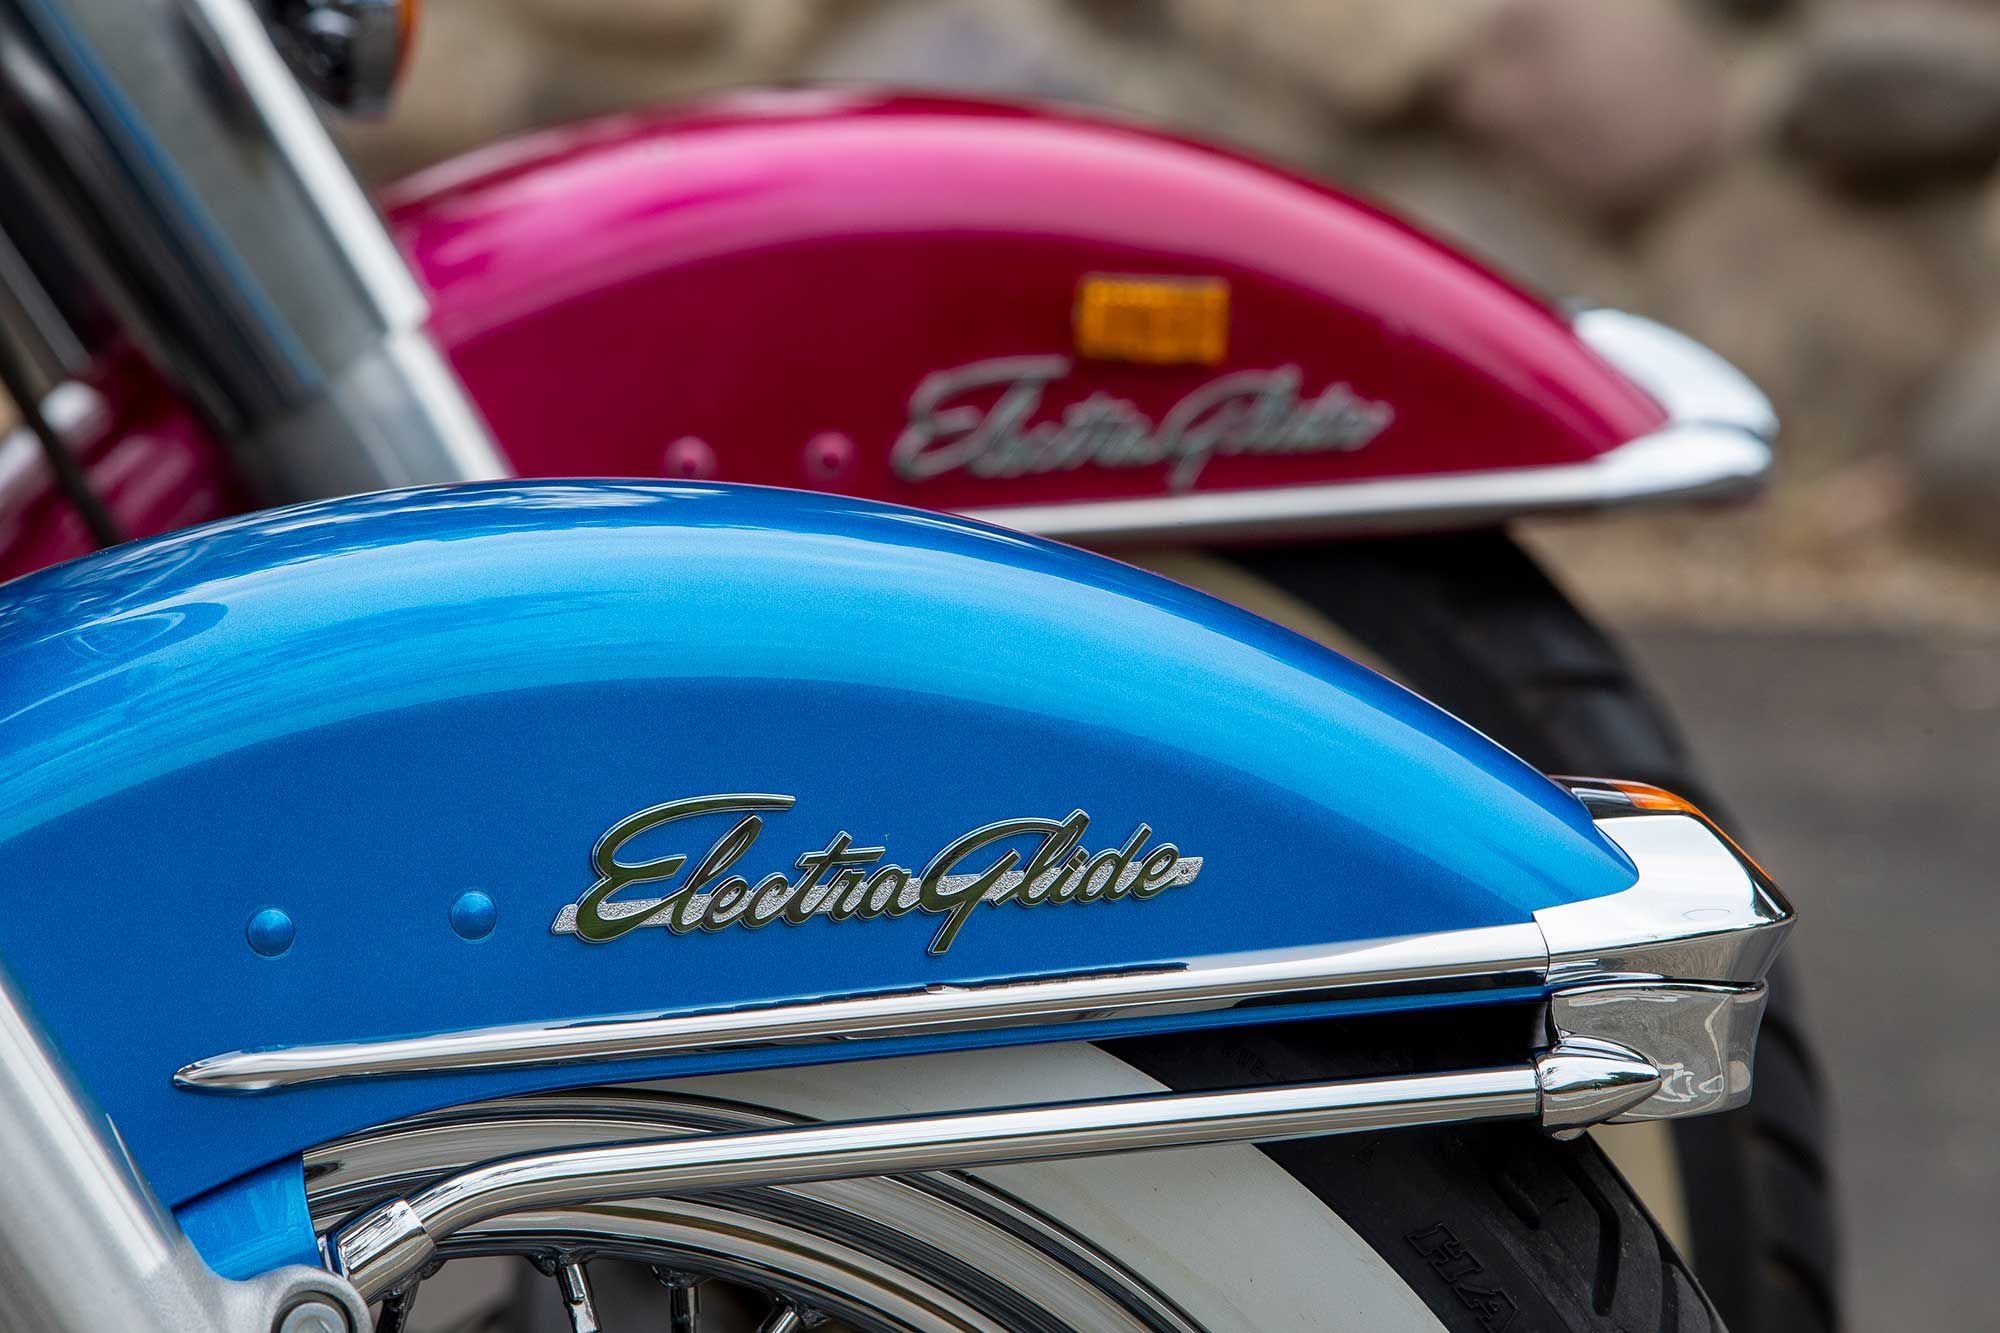 The classic Electra Glide insignia adorns the revival front fairing and the FLH behind it.